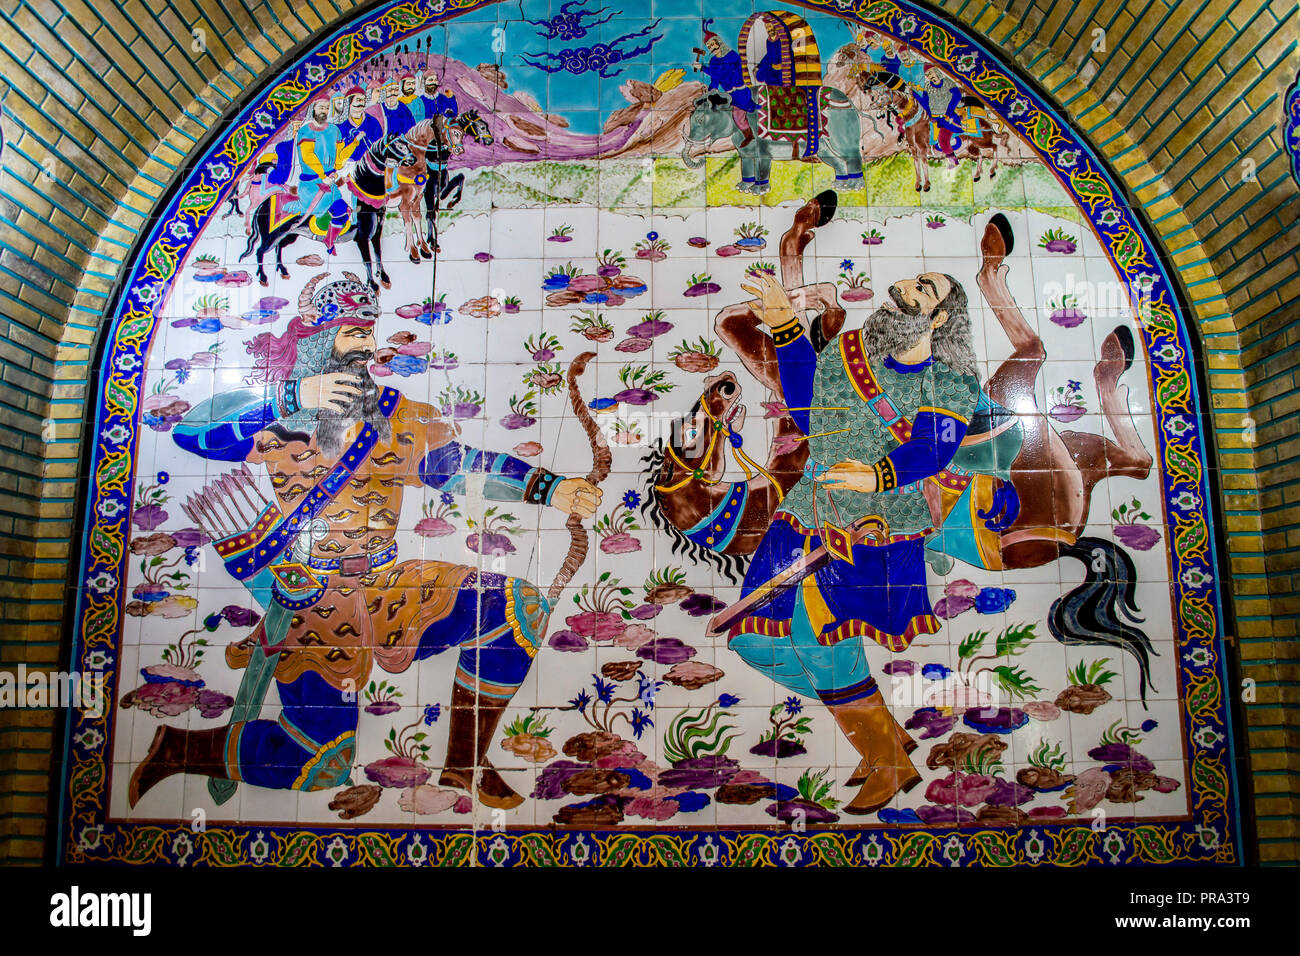 A drawing depicting a scene from Ferdowsi's poem 'Shahname' in a tea room at Afif Abad Garden in Shiraz, Iran Stock Photo